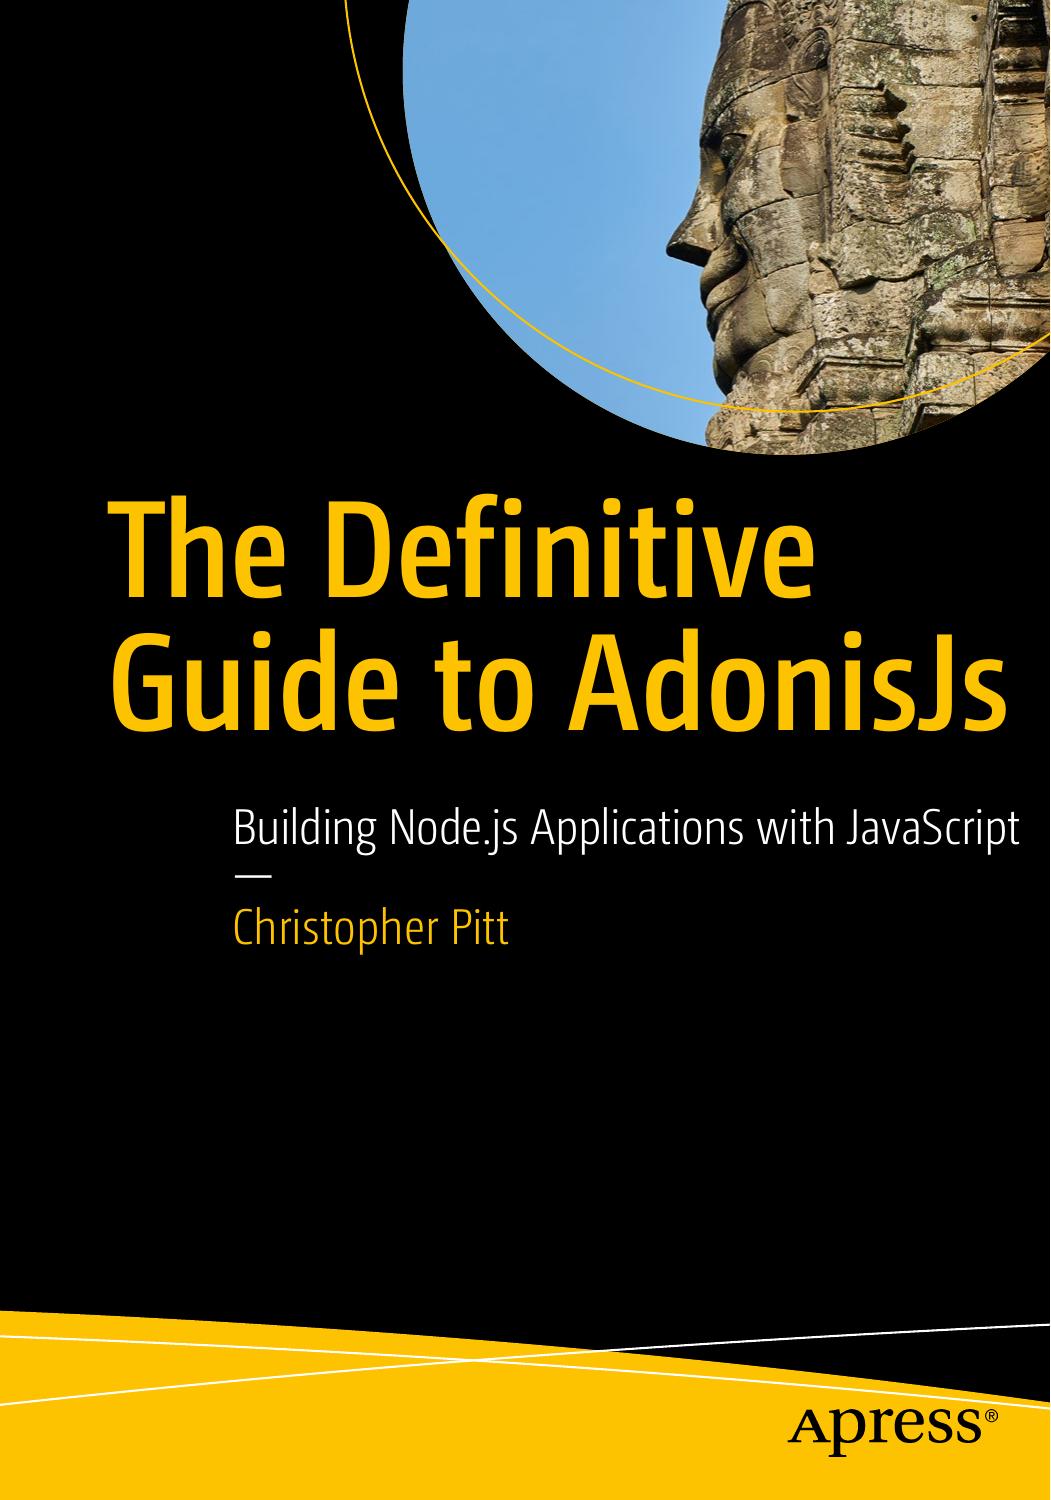 The Definitive Guide to AdonisJs by Christopher Pitt